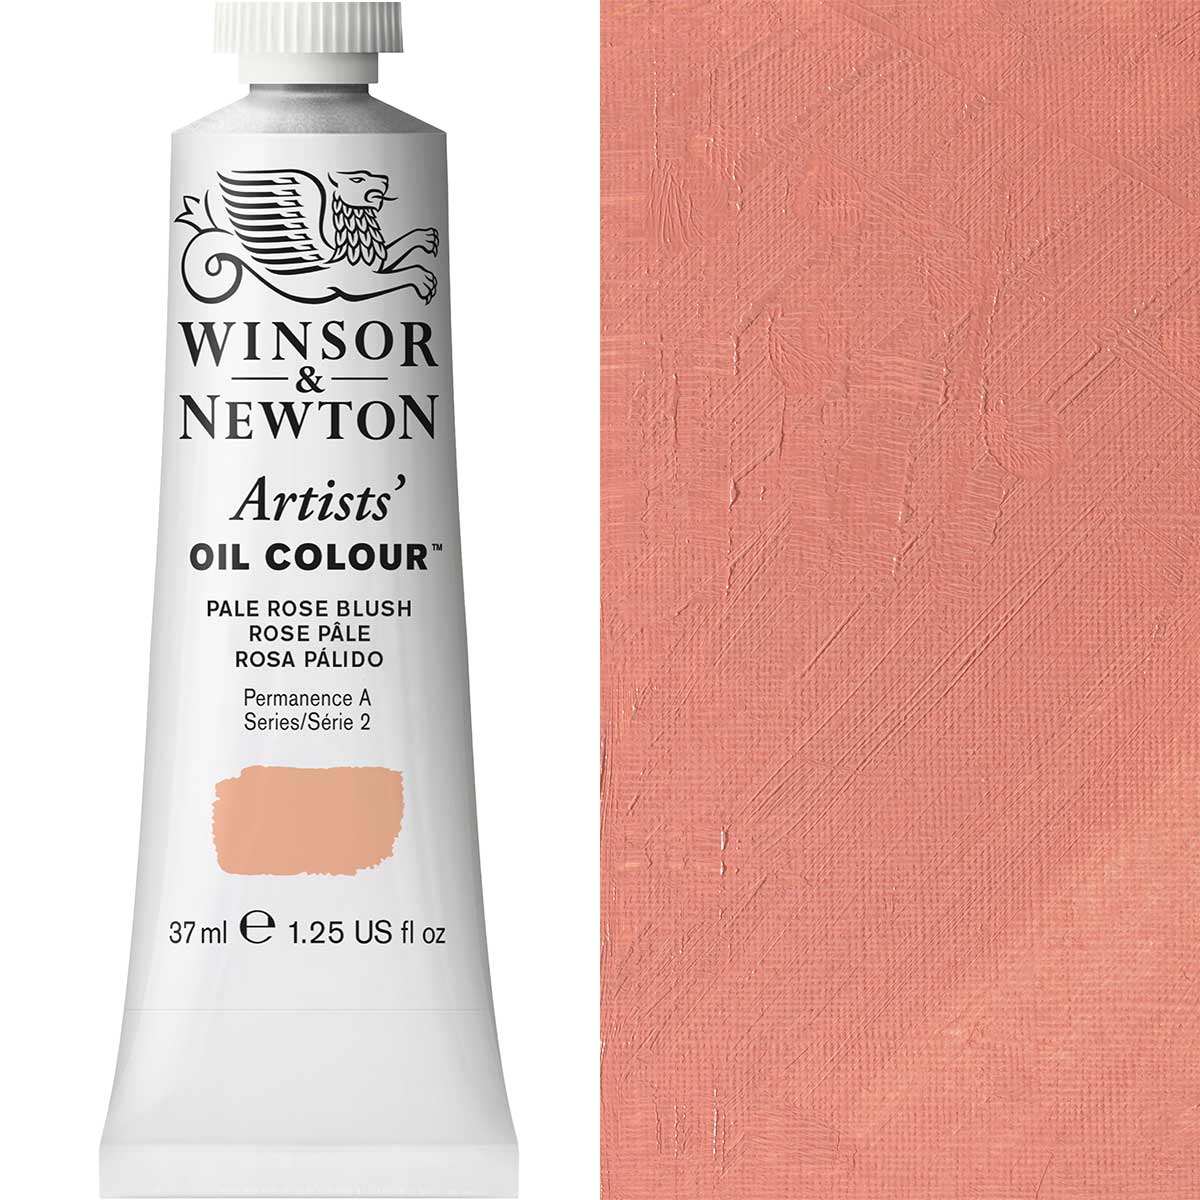 Winsor and Newton - Artists' Oil Colour - 37ml - Pale Rose Blush